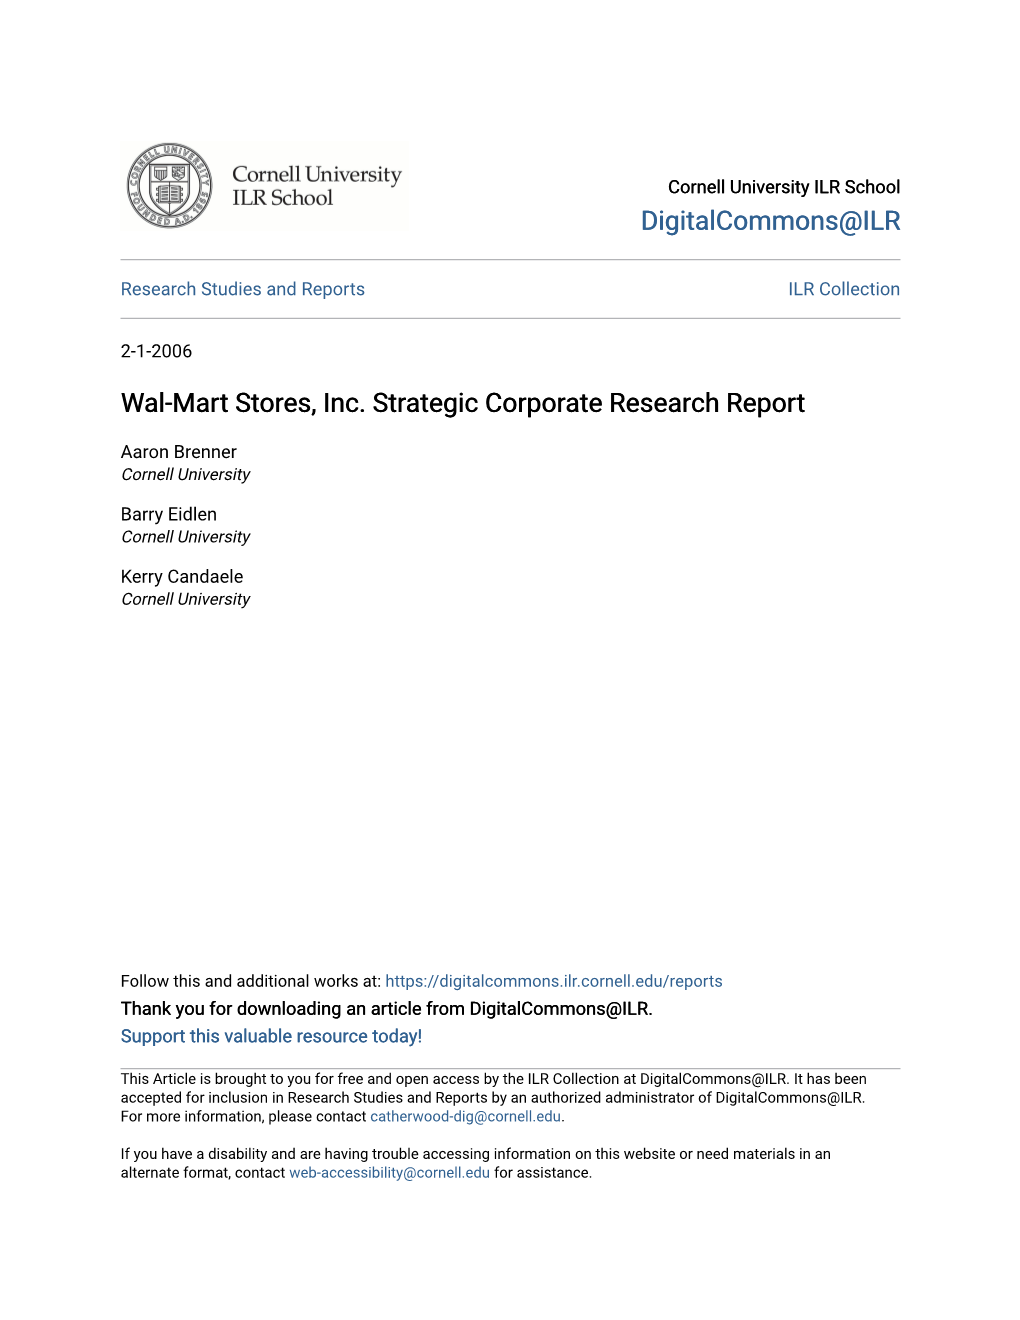 Wal-Mart Stores, Inc. Strategic Corporate Research Report